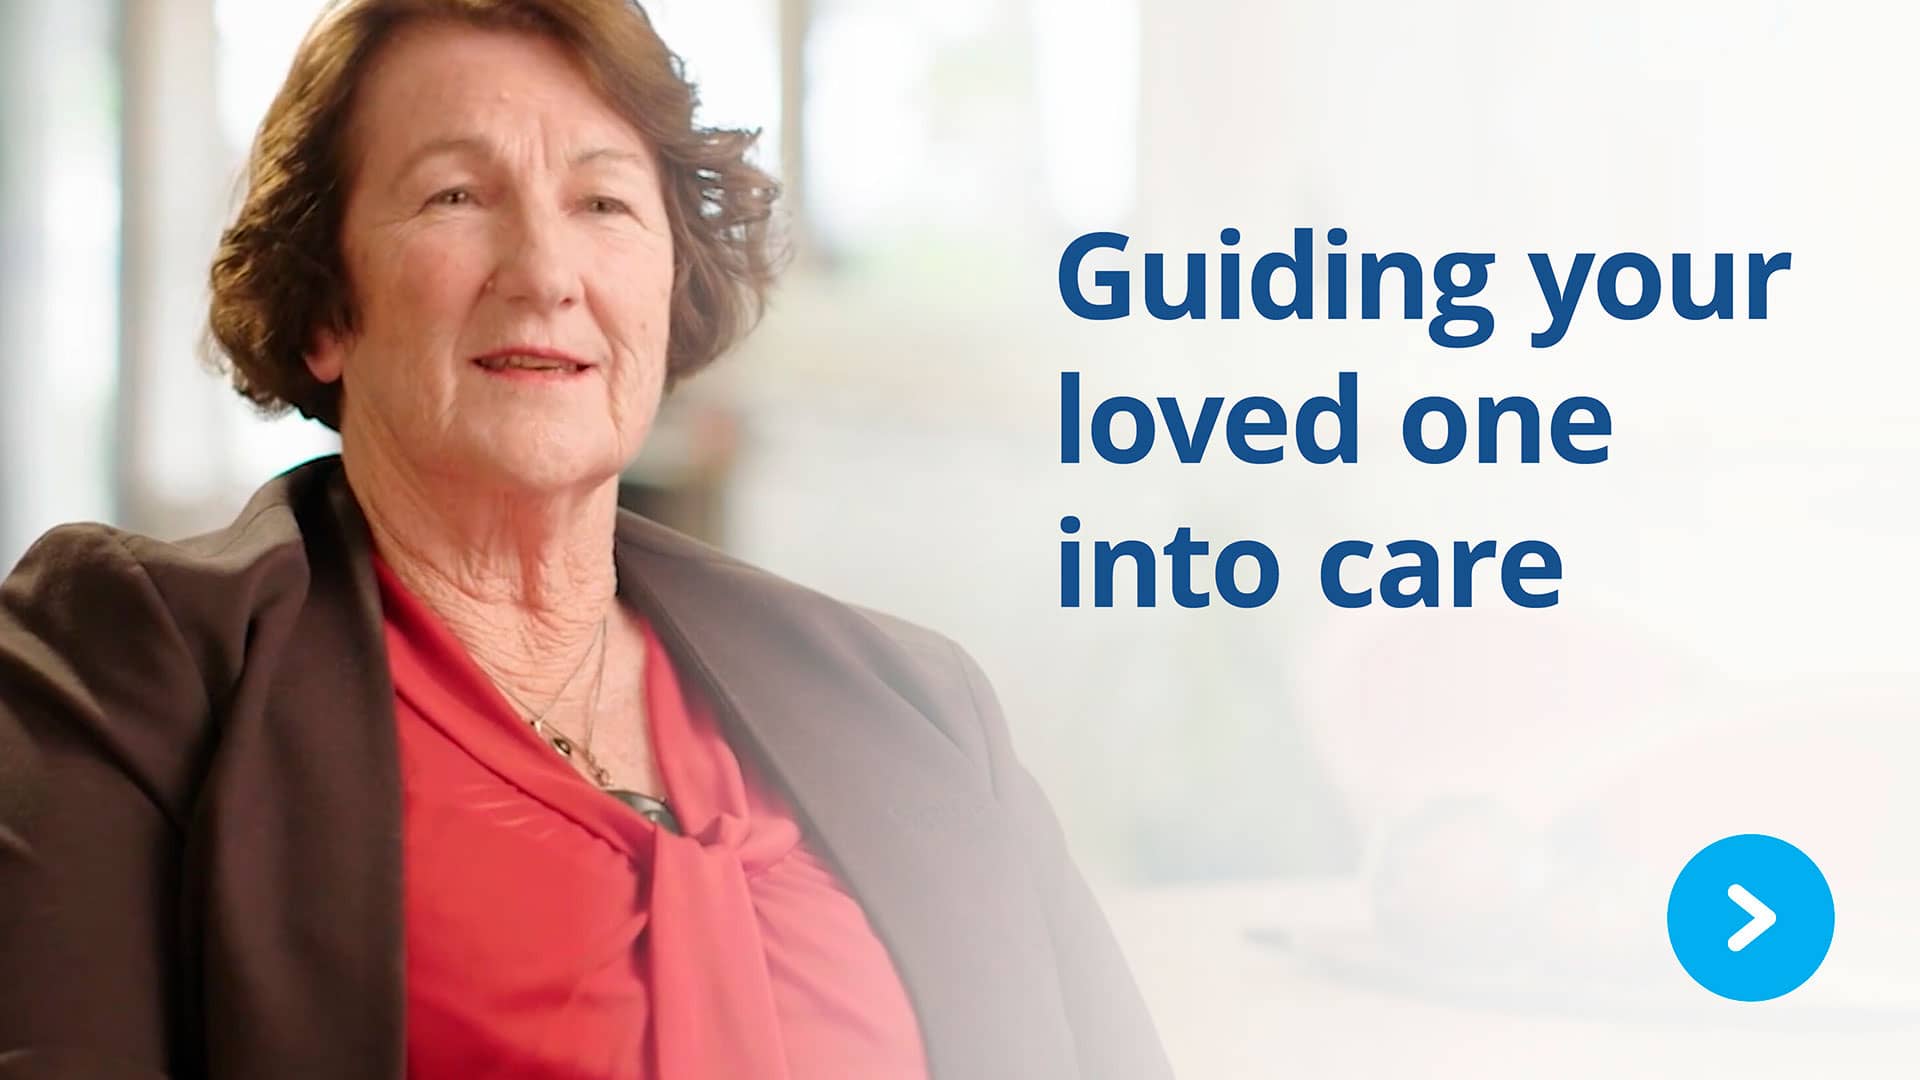 Guiding your loved one into care